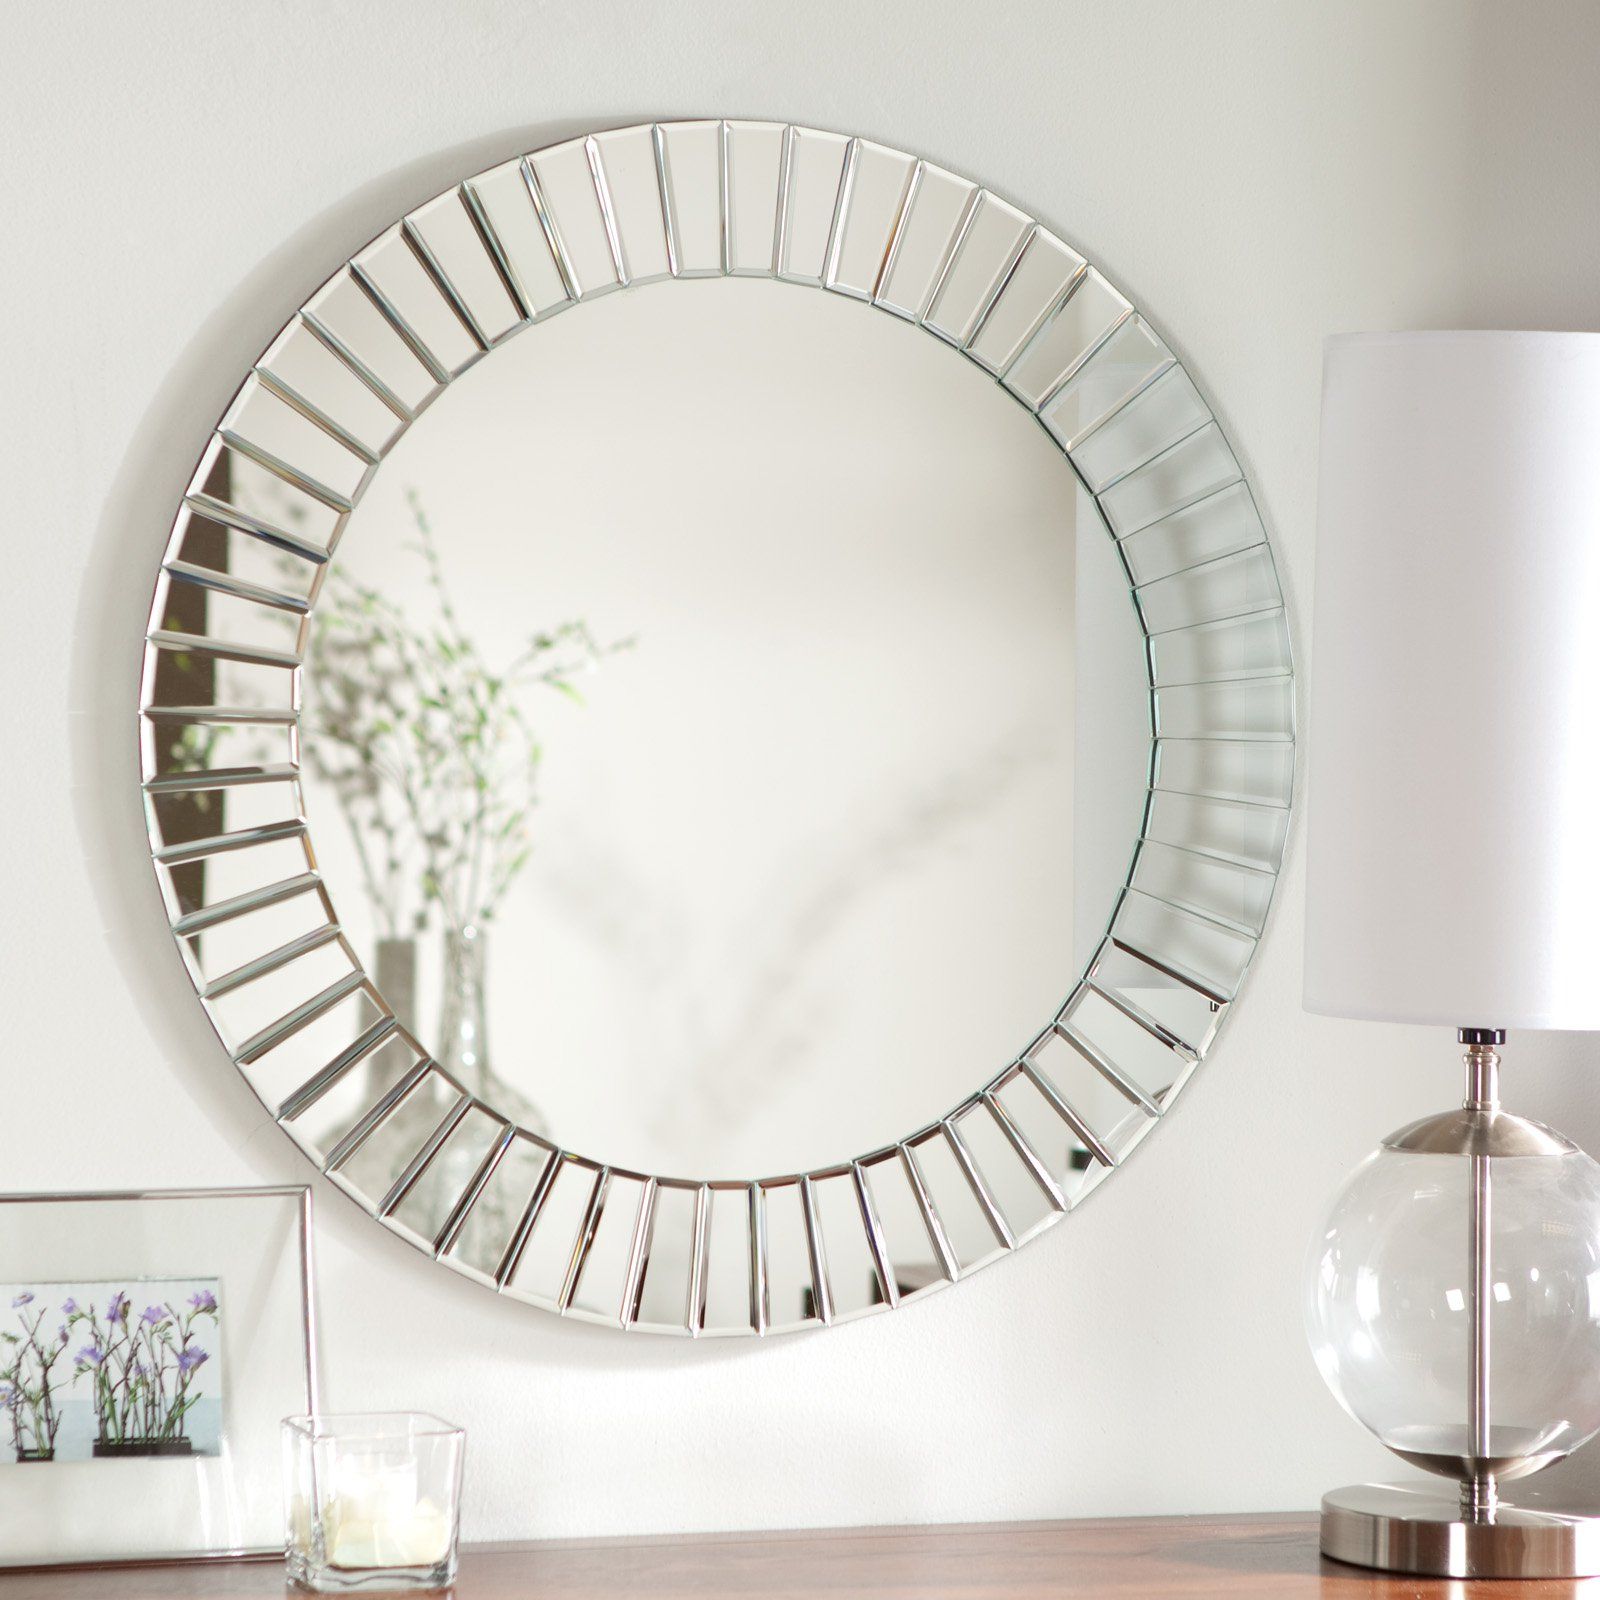 Remarkable Decorative Beveled Wall Mirrors Frame Large Three Diy Inside Well Known Fancy Wall Mirrors (View 20 of 20)